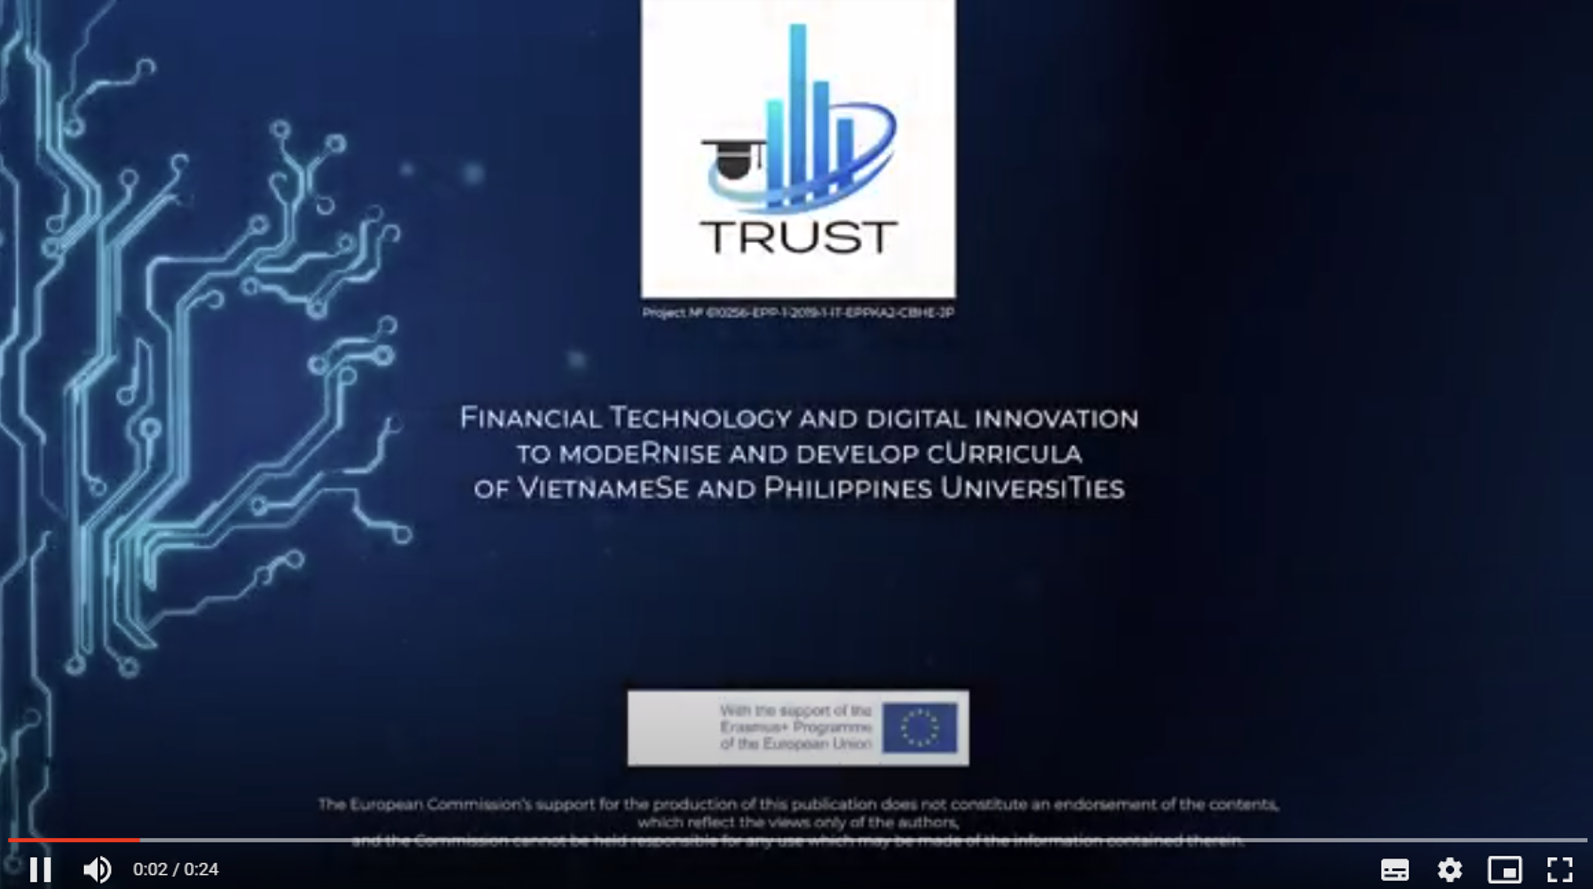 TRUST Project’s Master in Financial Technology Course Development Gains Ground